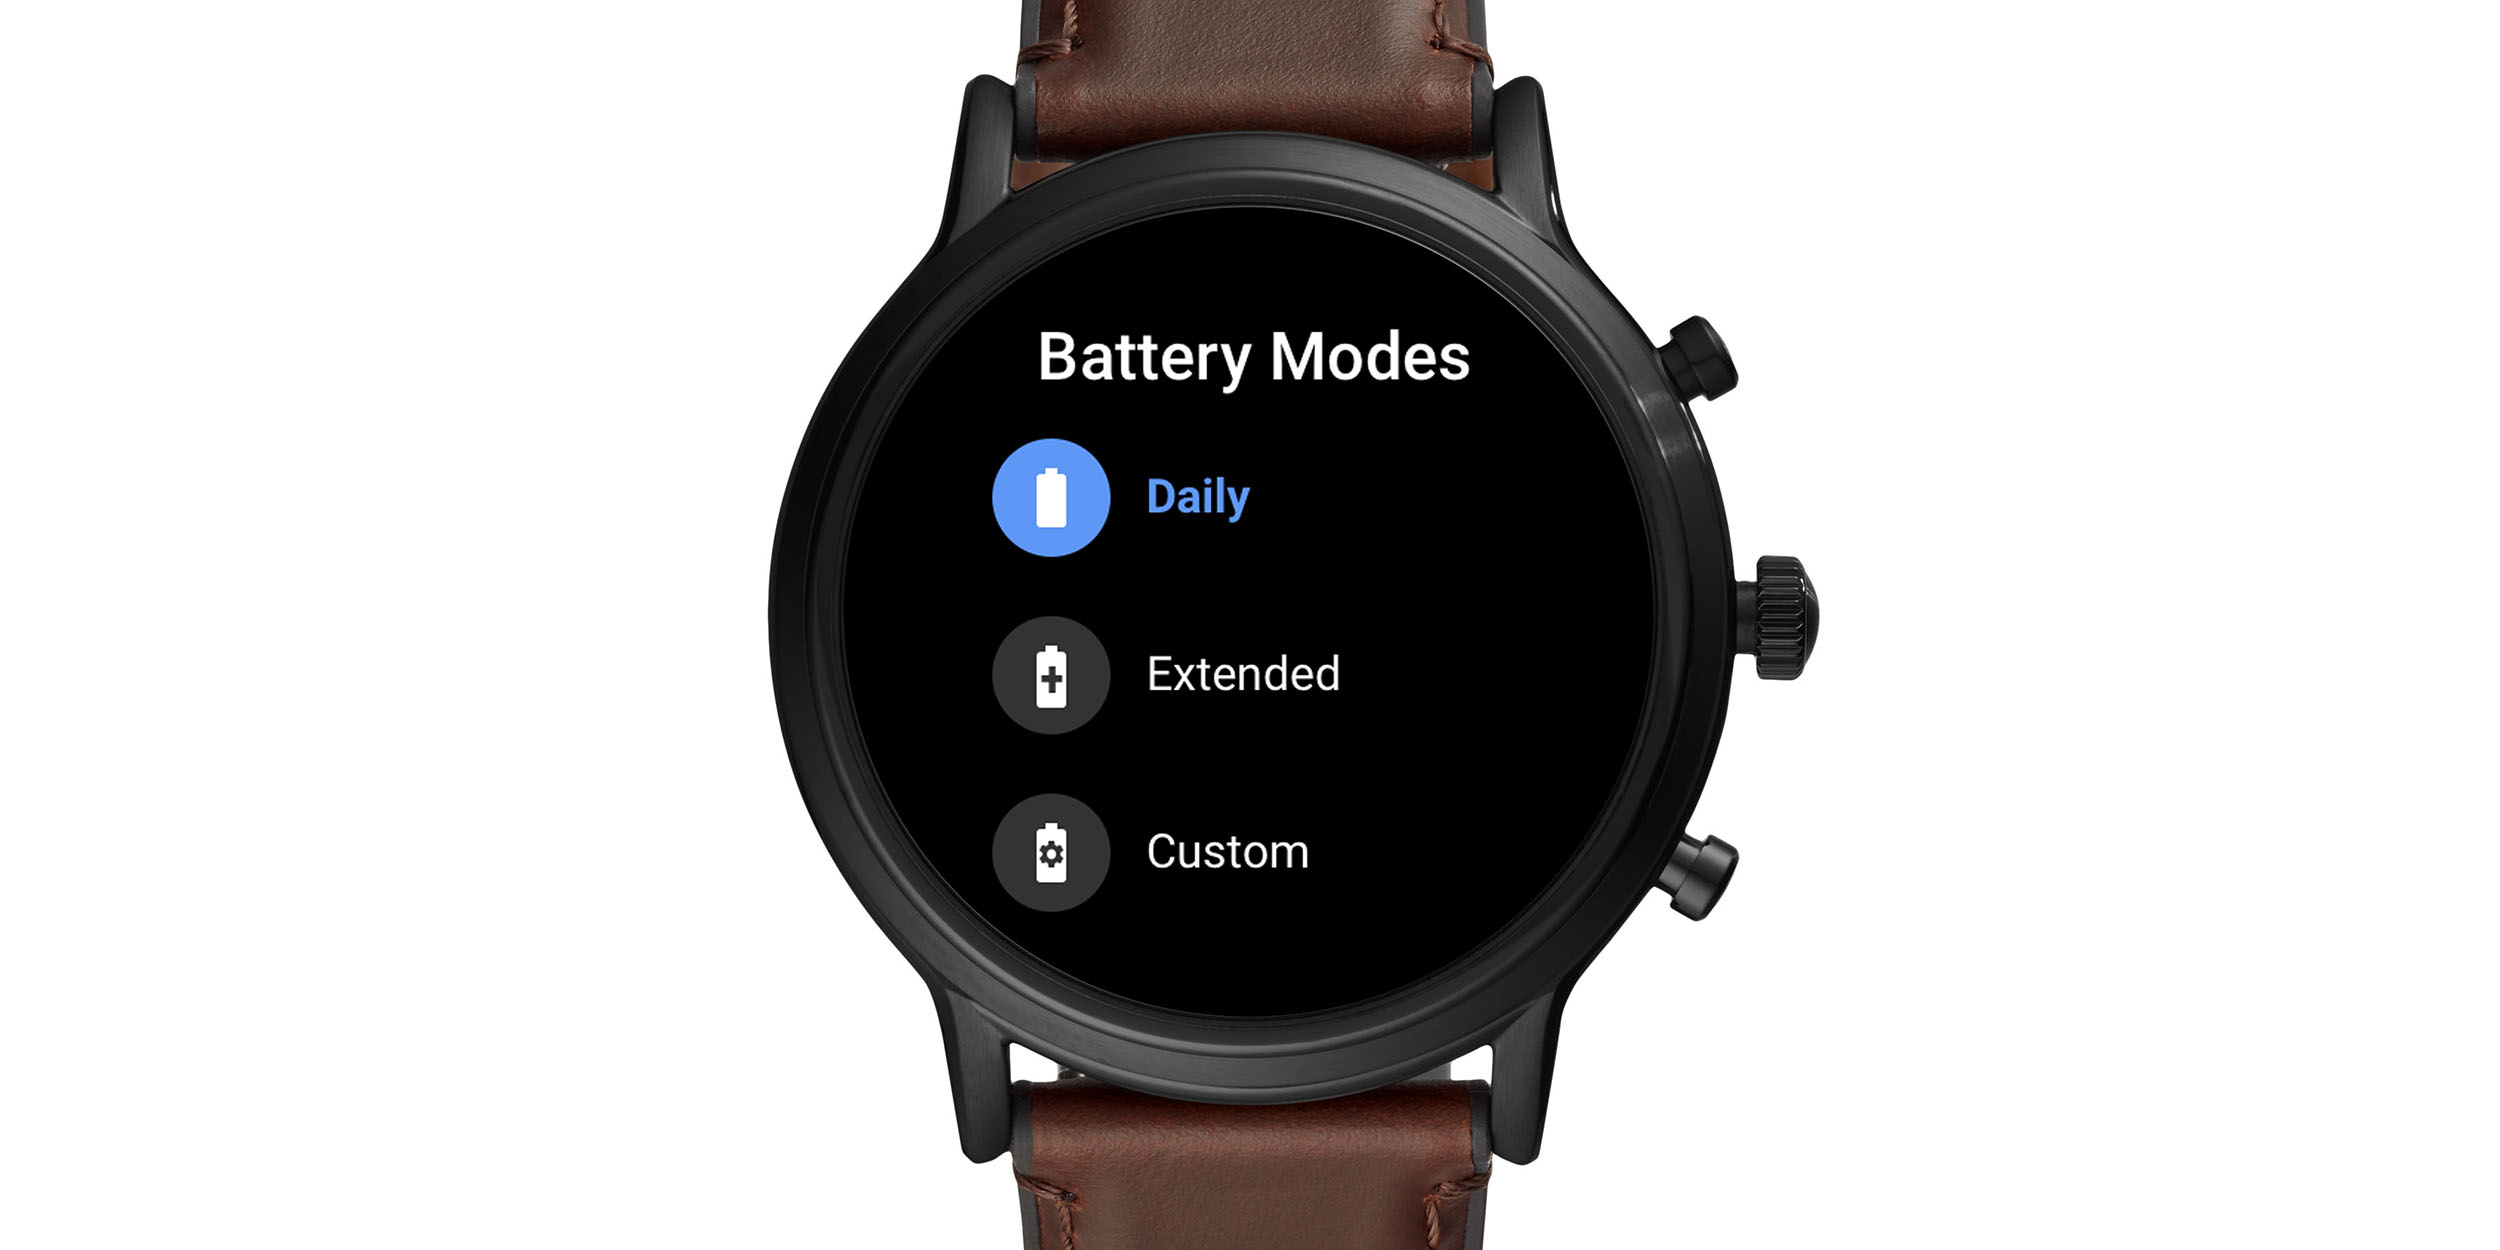 Fisker by spurv Here are Fossil's smart battery modes for Wear OS - 9to5Google